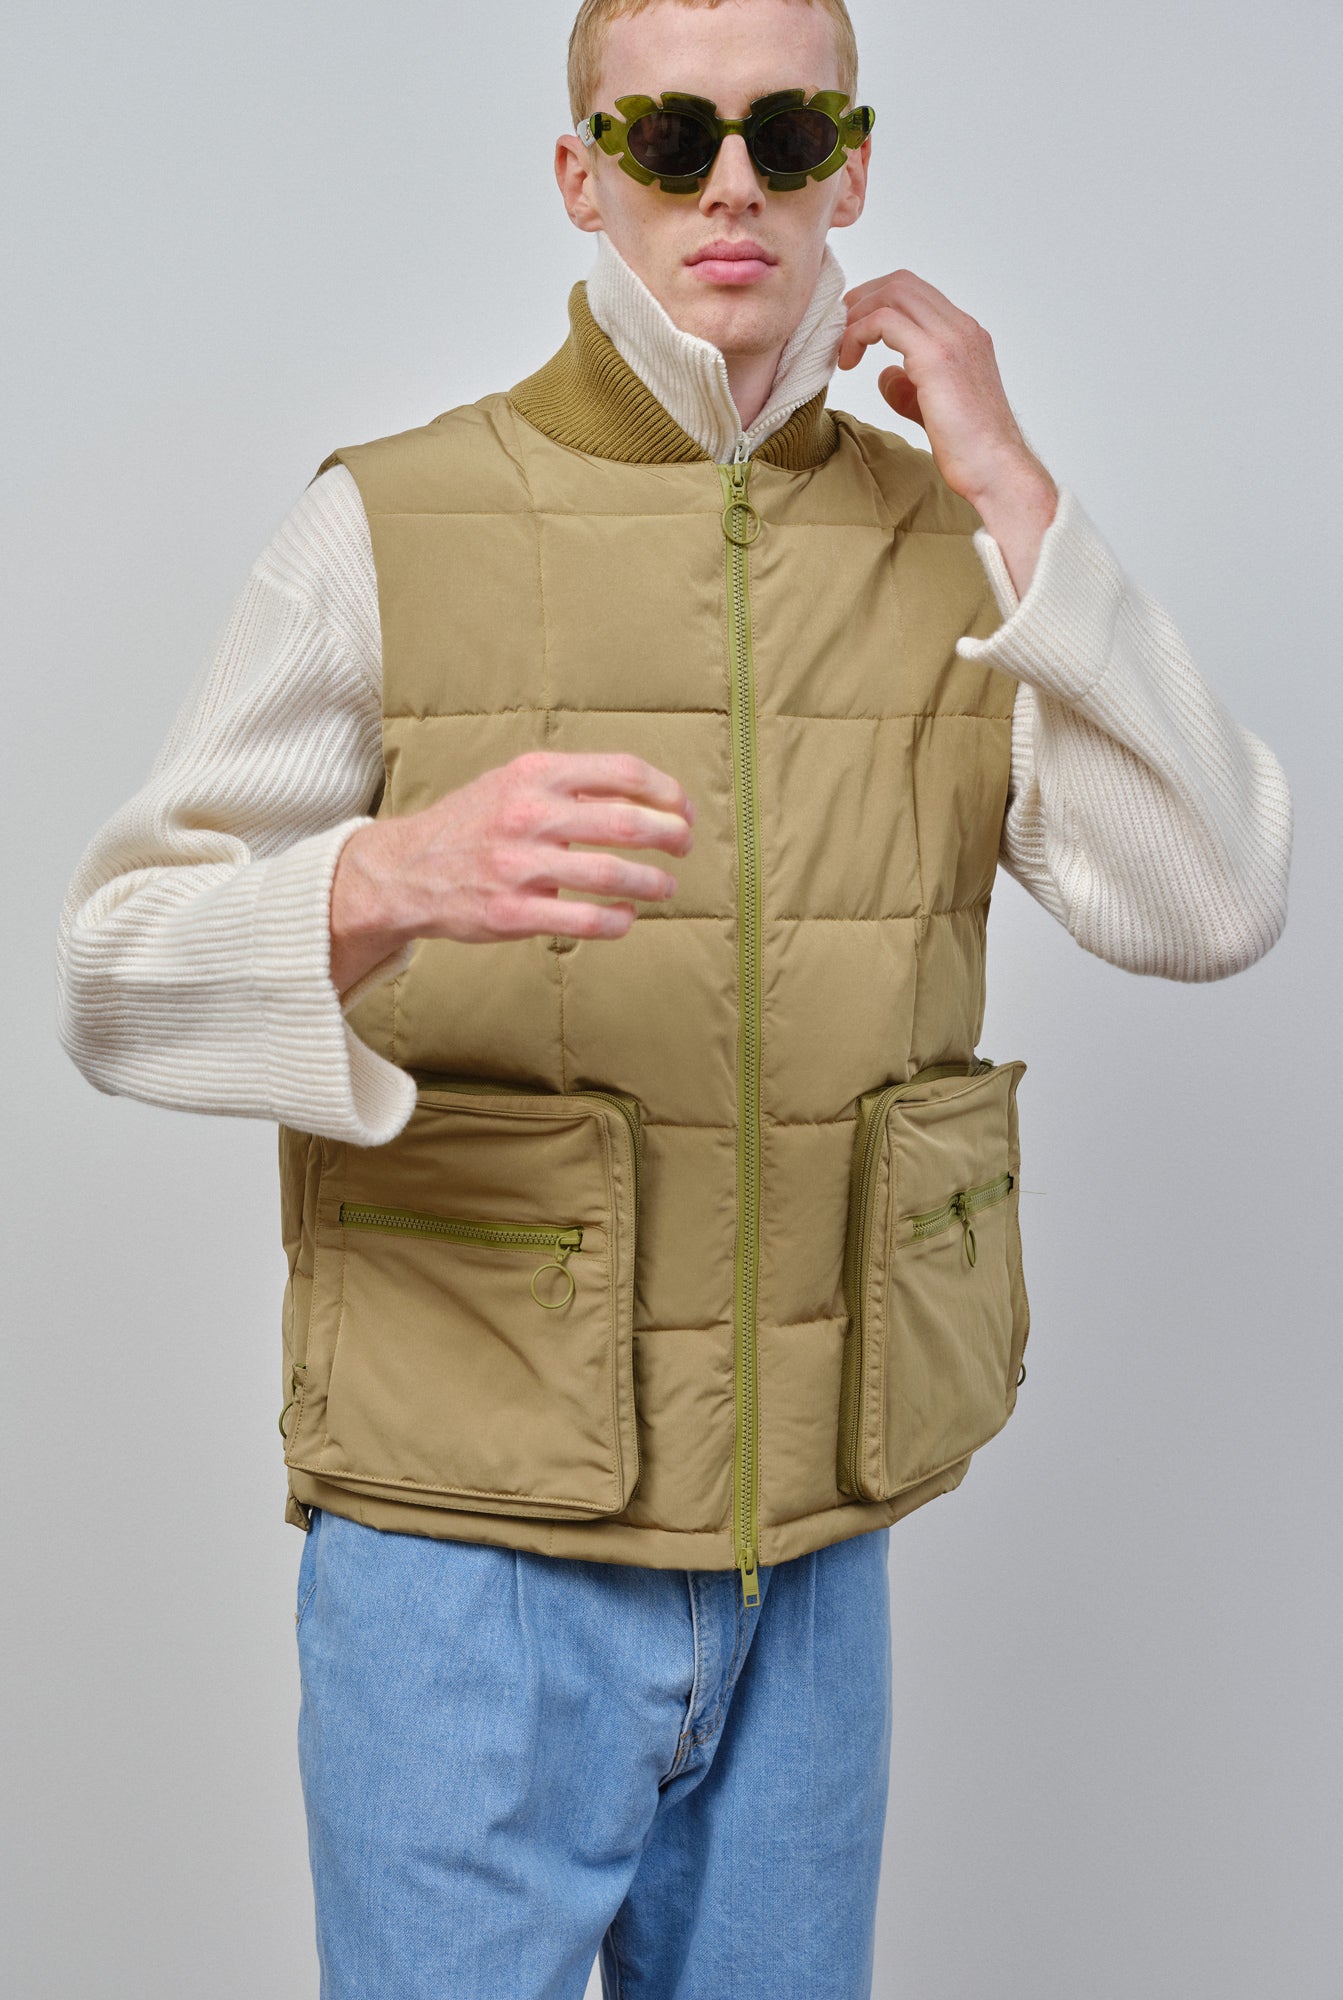 Embassy-of-Bricks-and-Logs-OUTLET-SALE-WARWICK-PUFFER-VEST-Jacken-Mantel-ARCHIVE-COLLECTION-2_1246a568-8c17-4ded-884c-c21c327c7e40.jpg